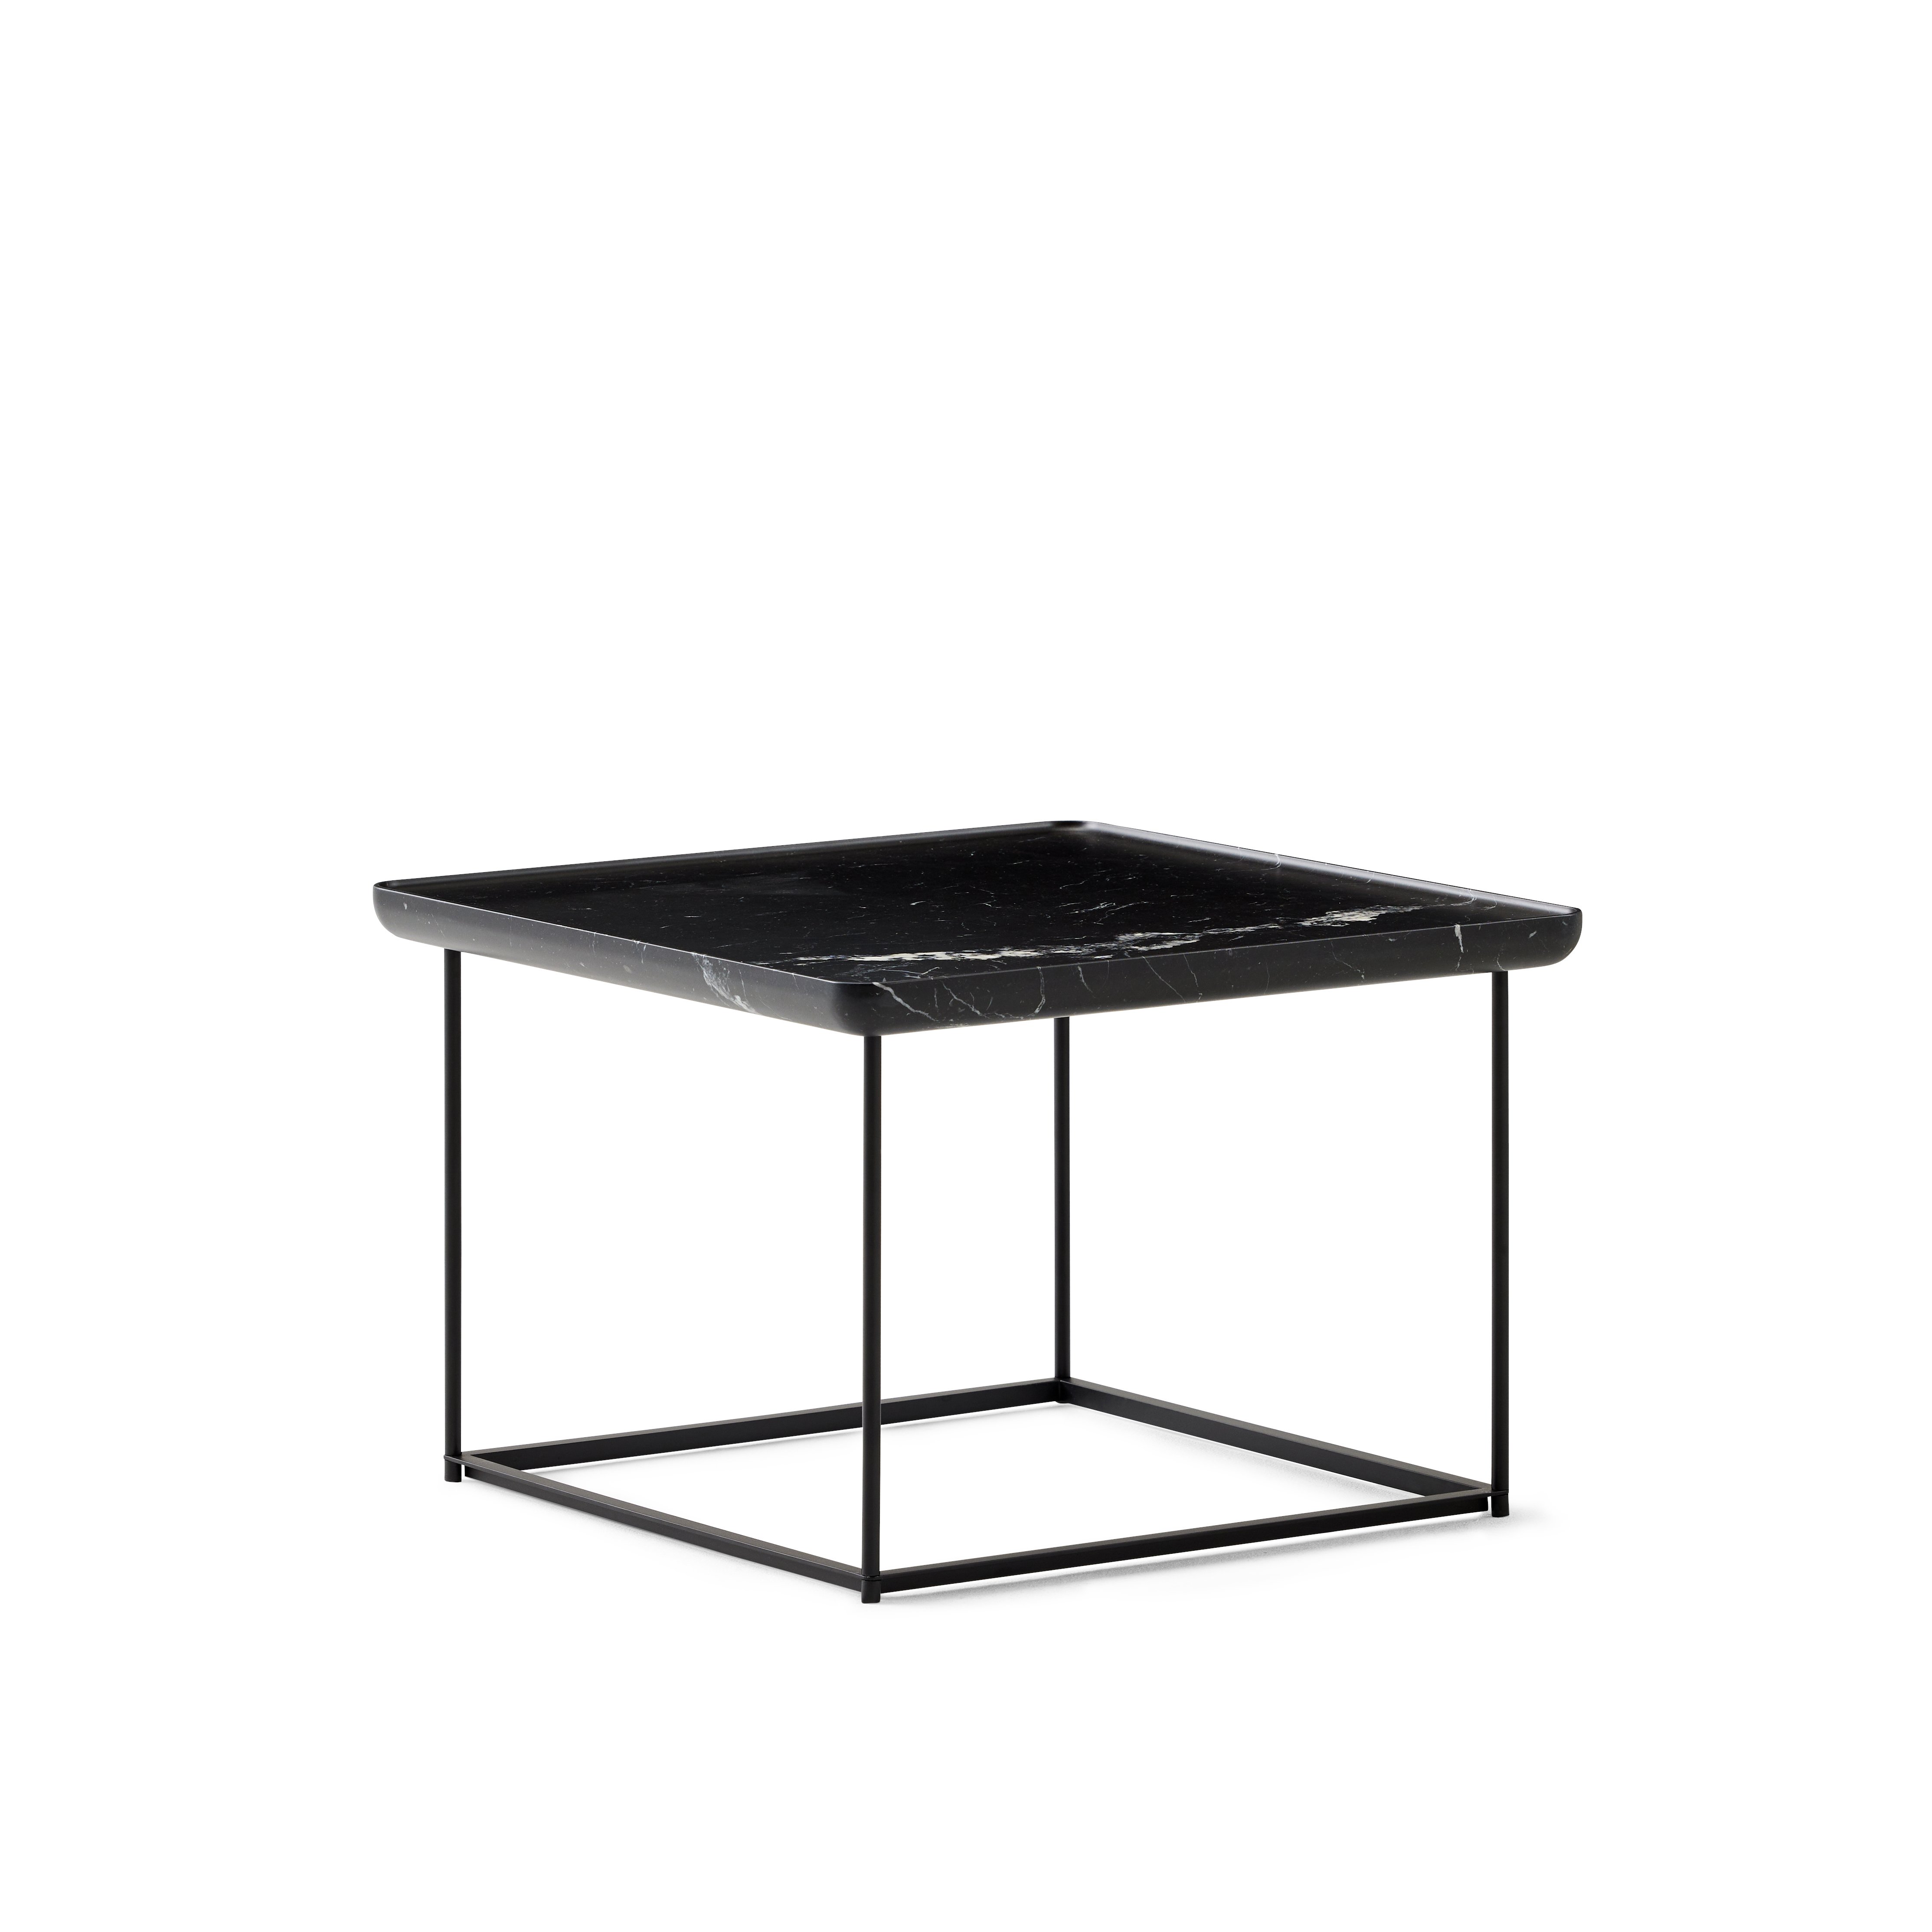 Detail front 3/4 shot of the Torei table in Black Marquina